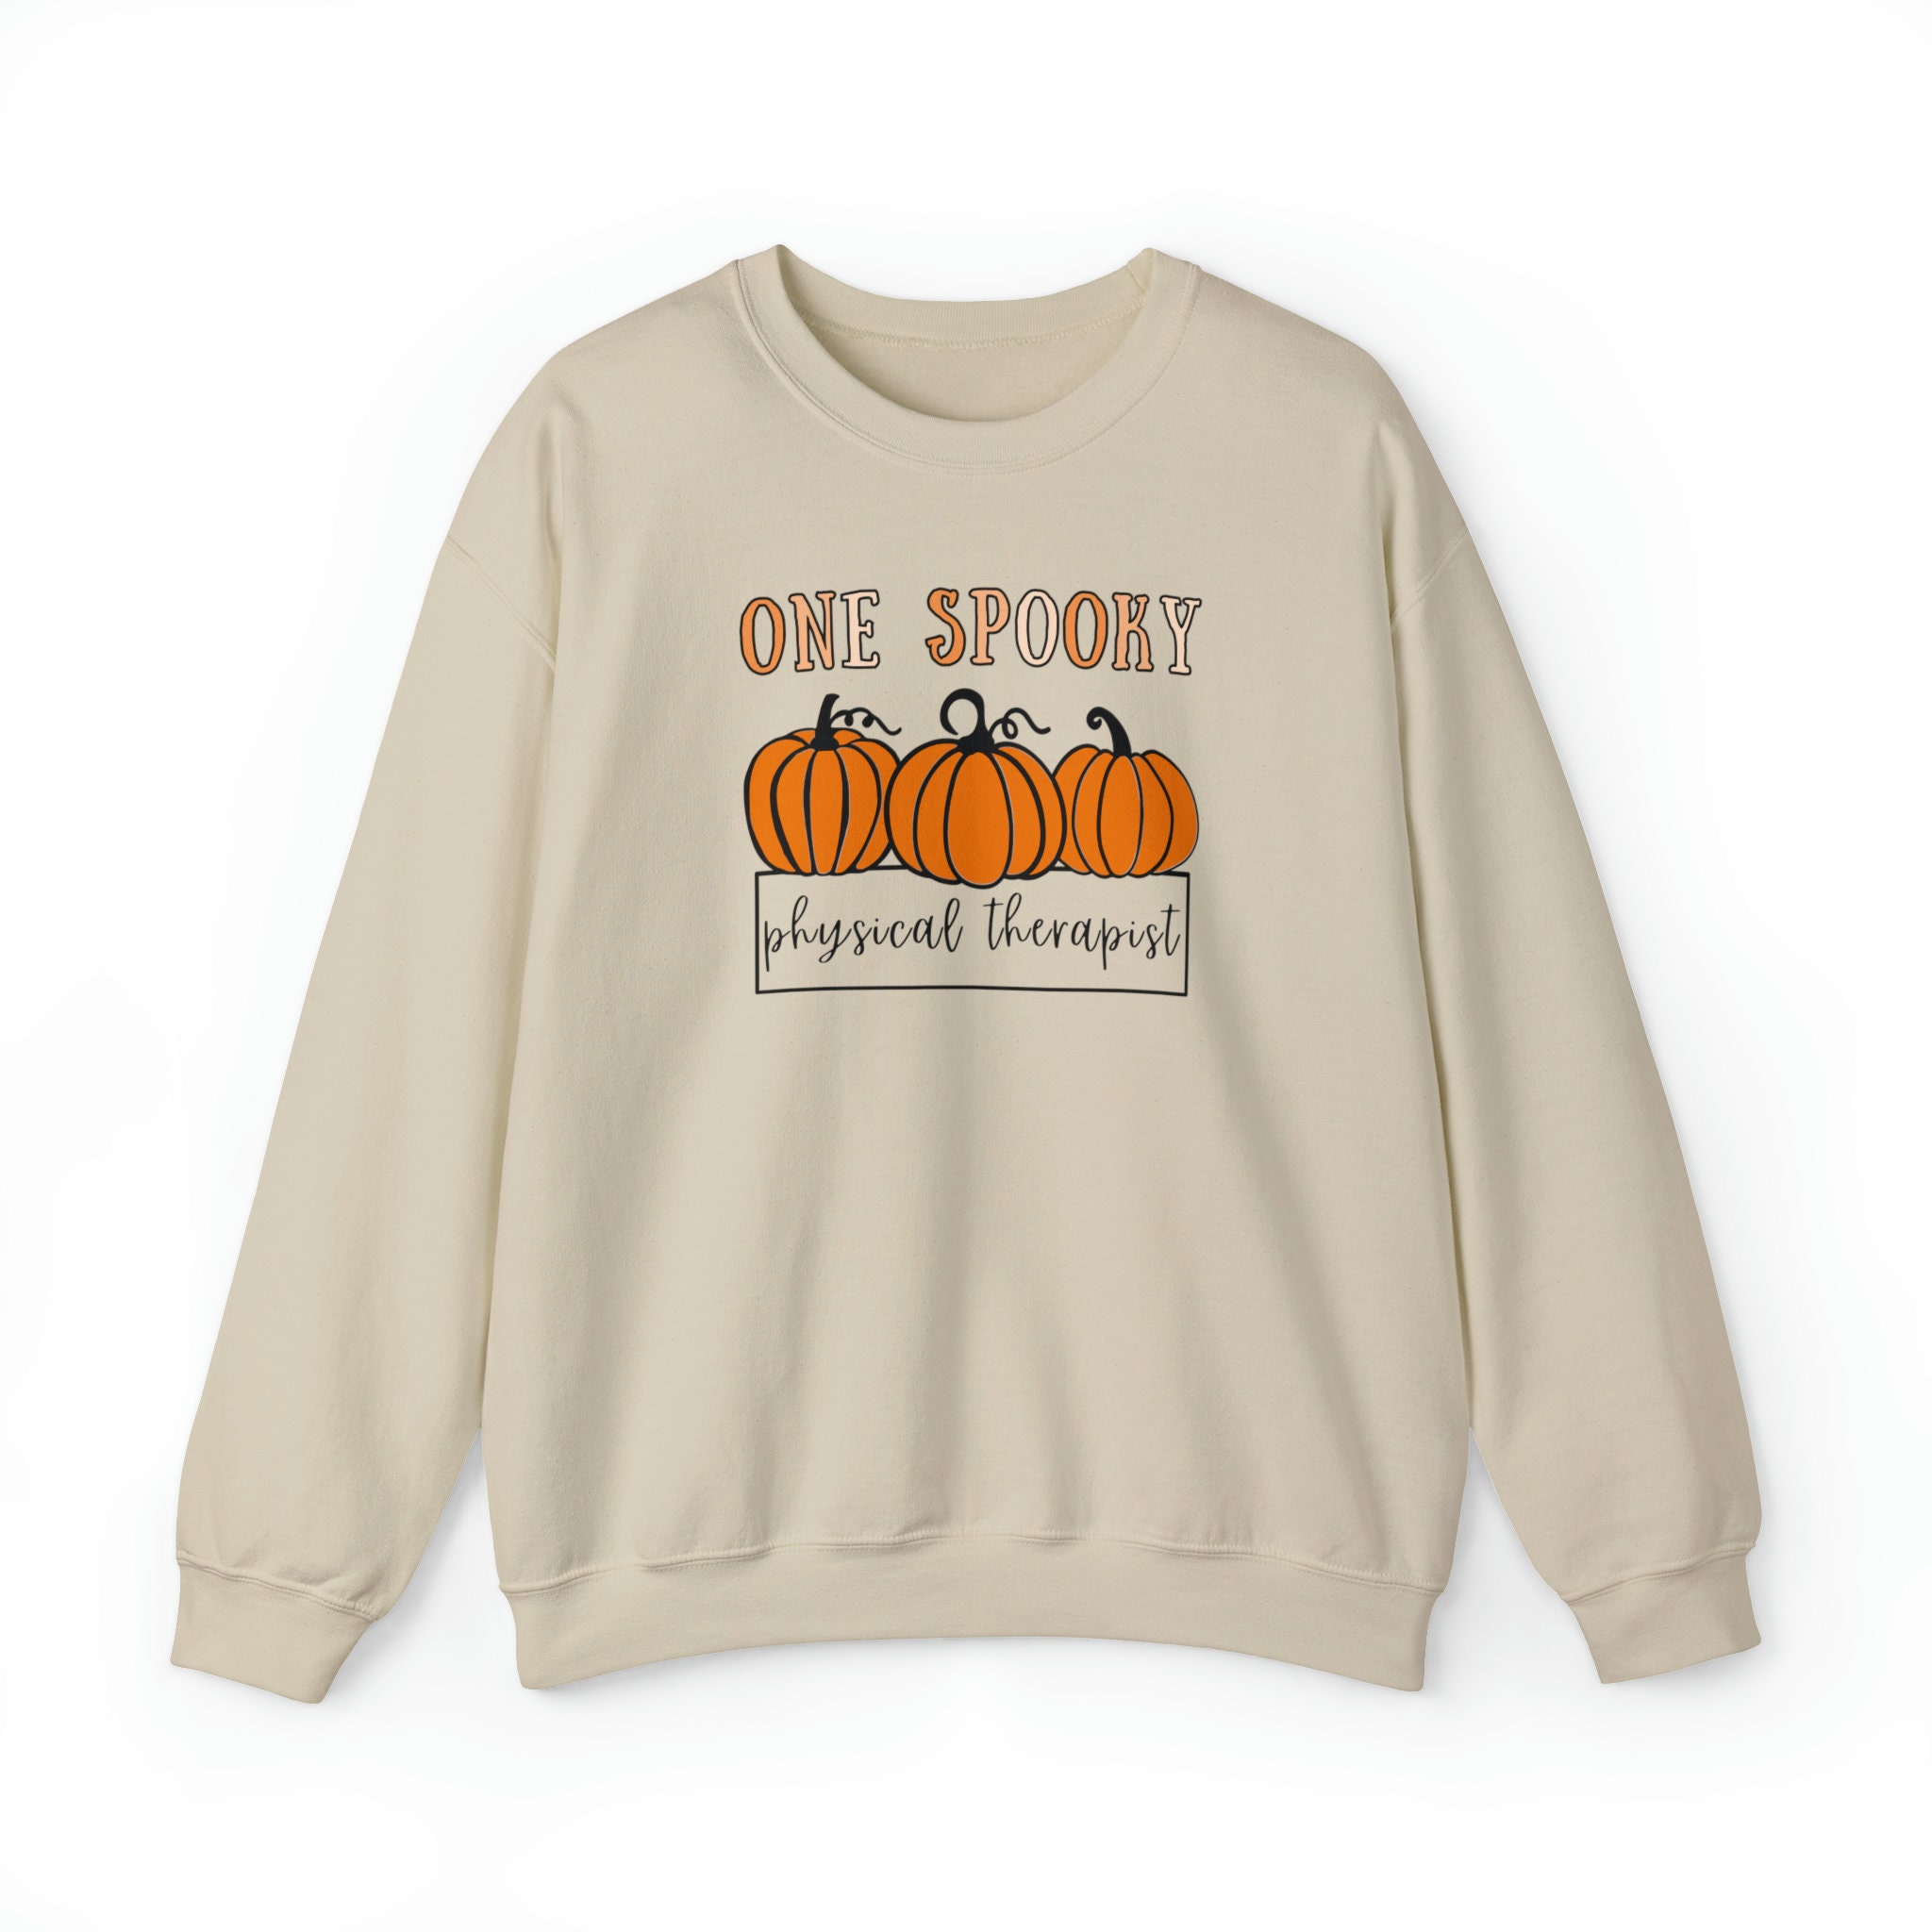 Discover One Spooky Physical Therapist Sweatshirt, PT Shirt, Physical Therapy, Pediatric PT, Physical Therapy PT, pt Sweatshirt, Halloween Crewneck